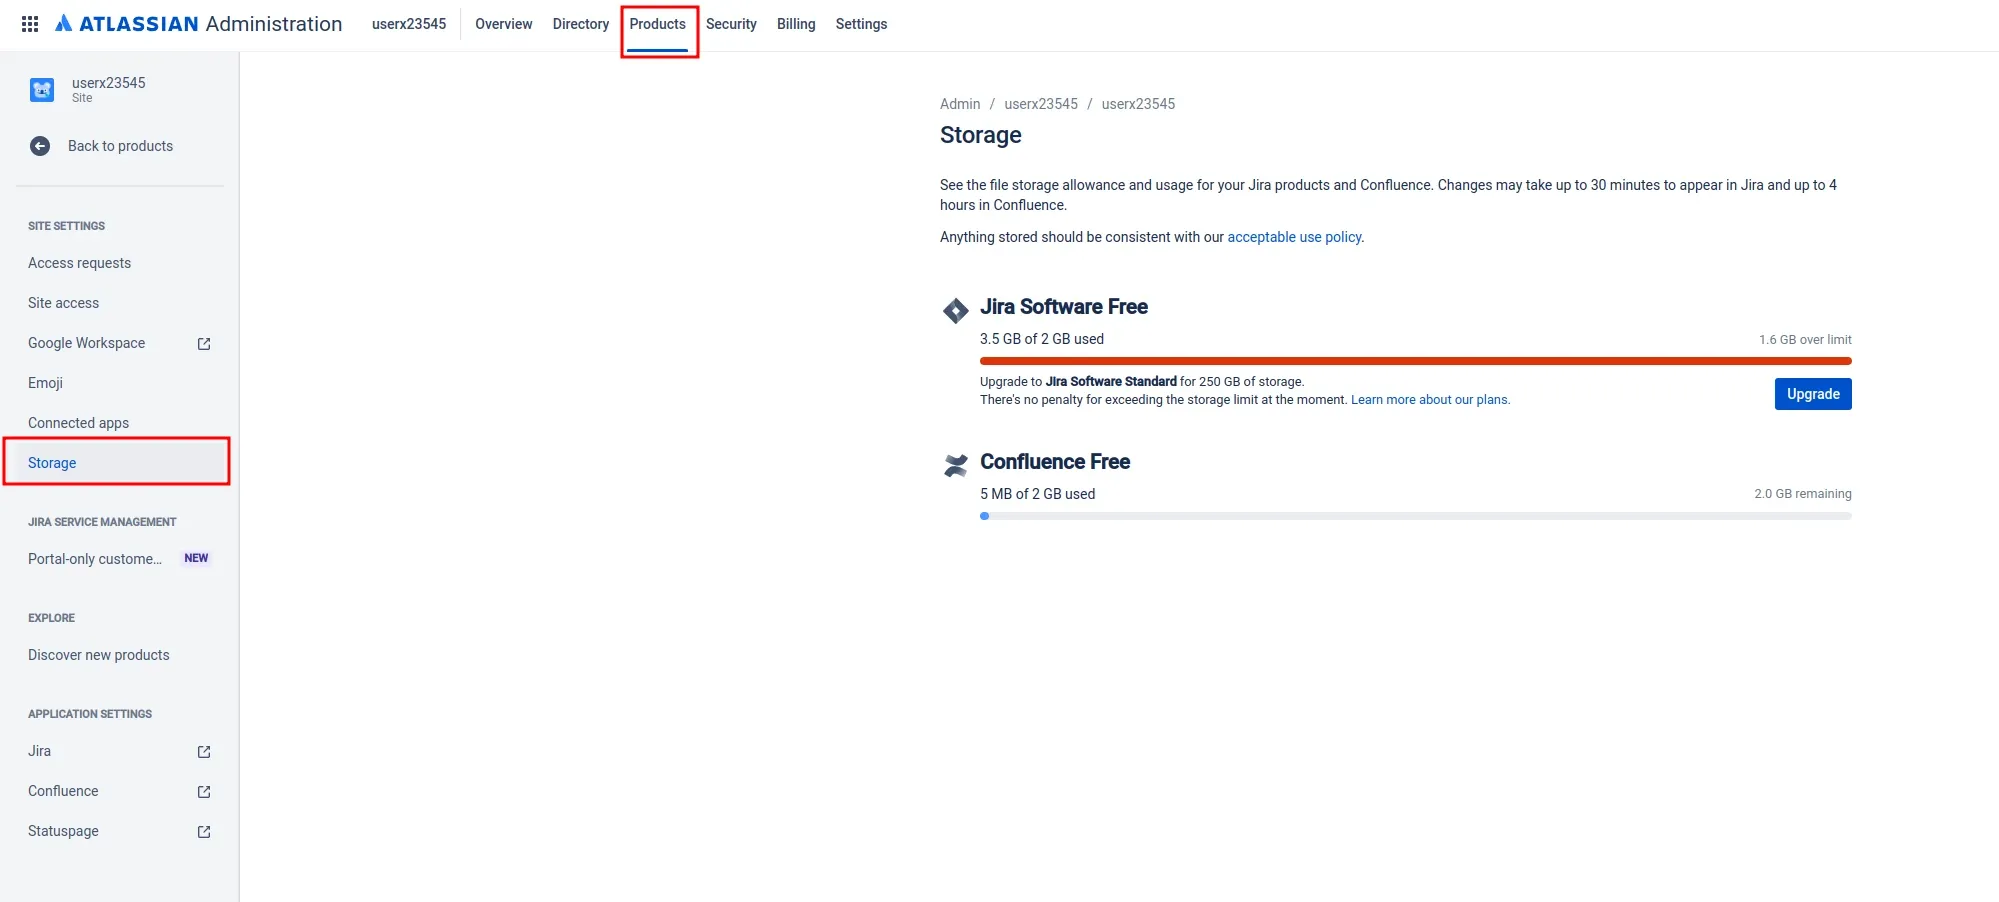 Fix Jira - You have exceeded the Free plan's 2 GB storage limit.